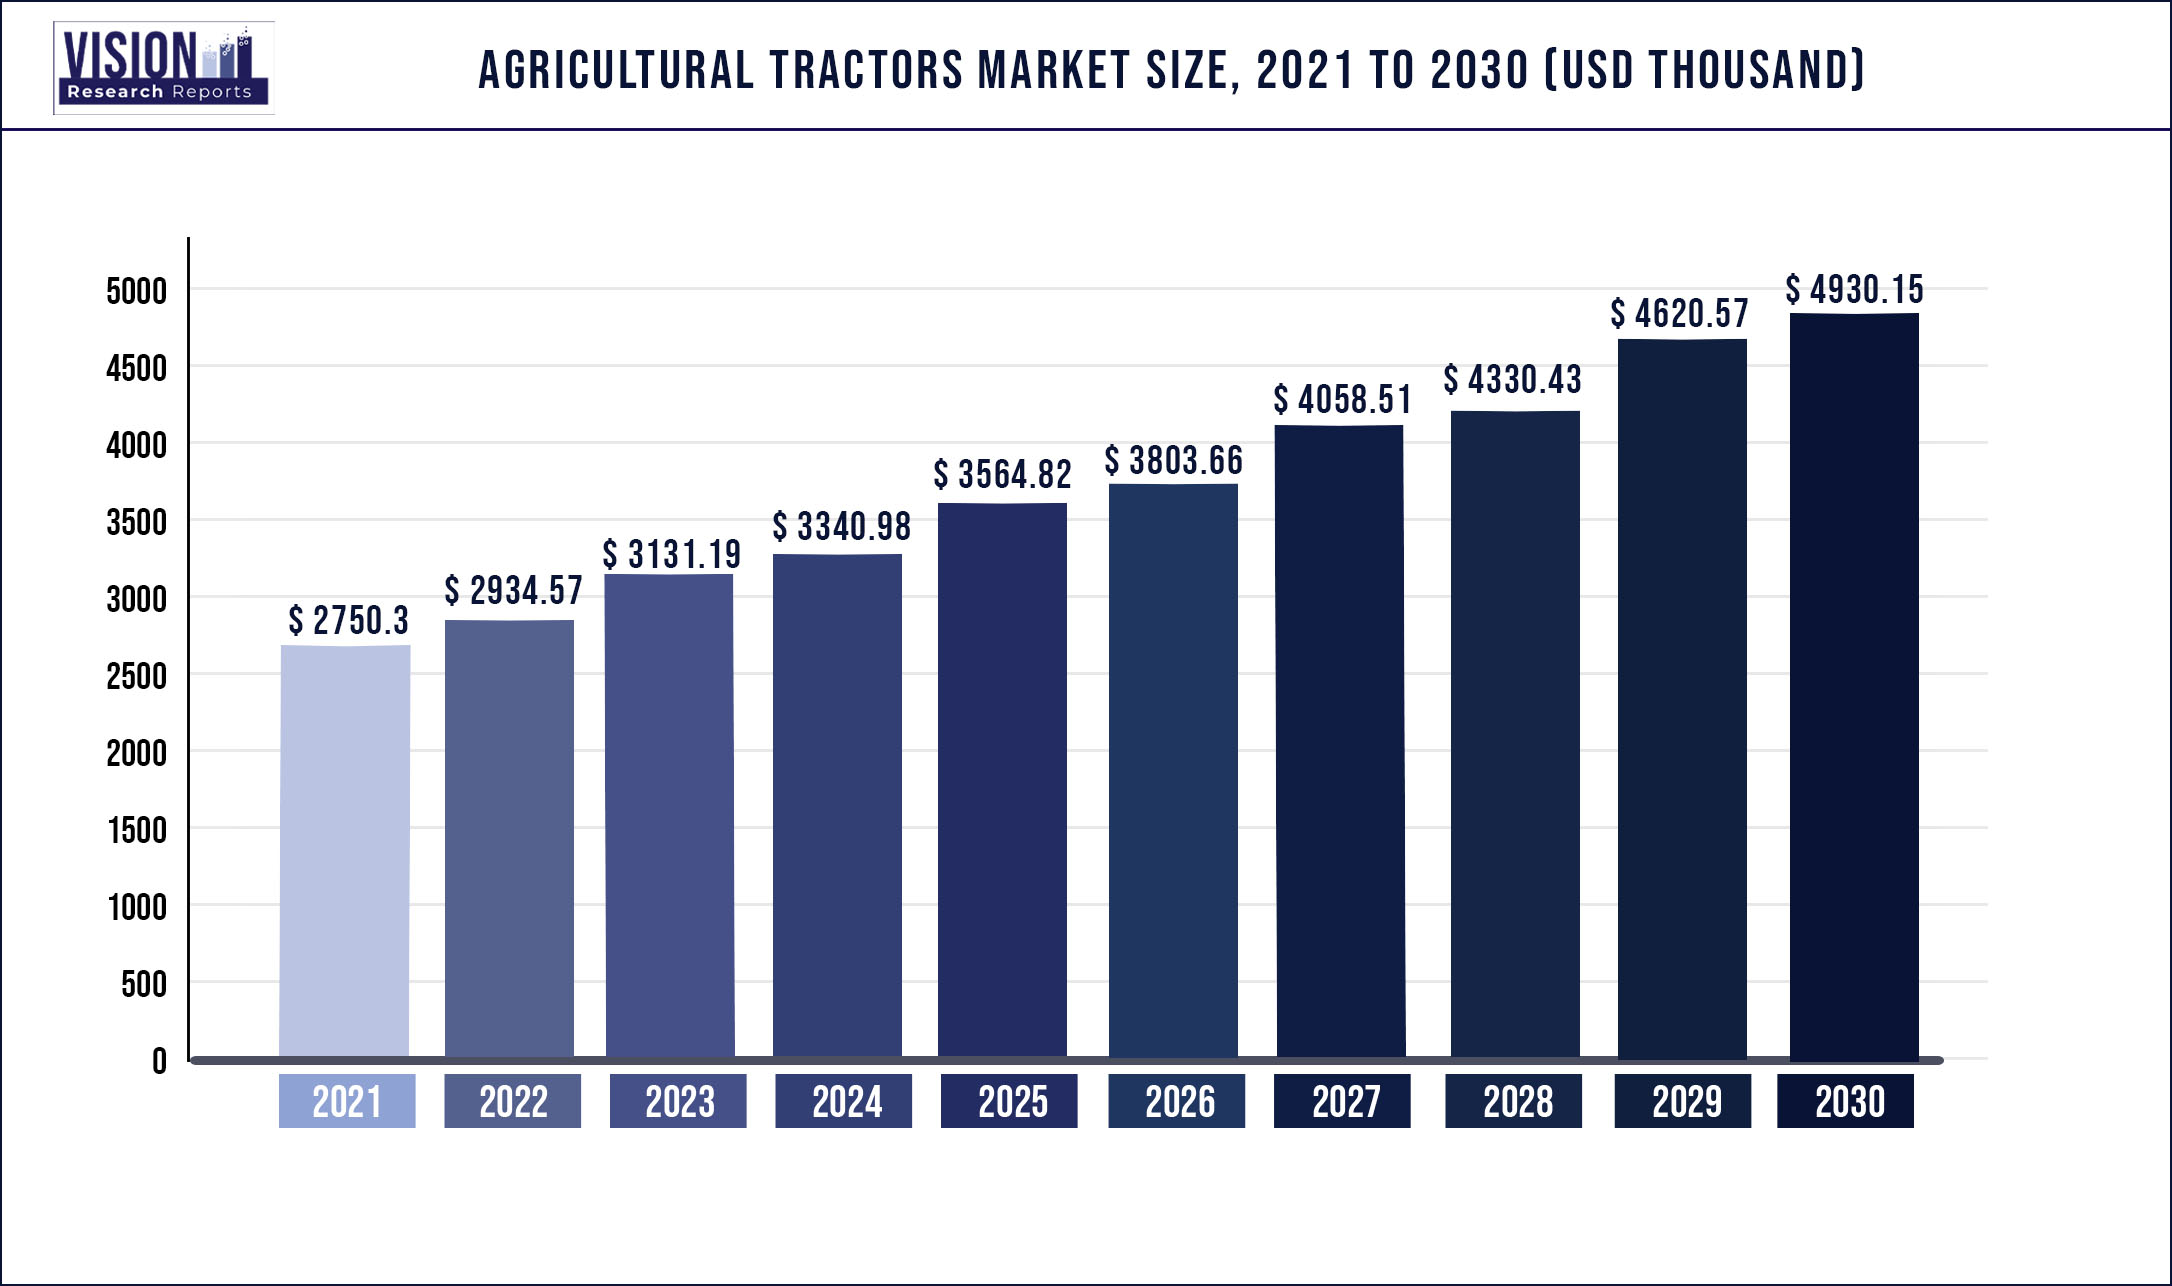 Agricultural Tractors Market Size 2021 to 2030